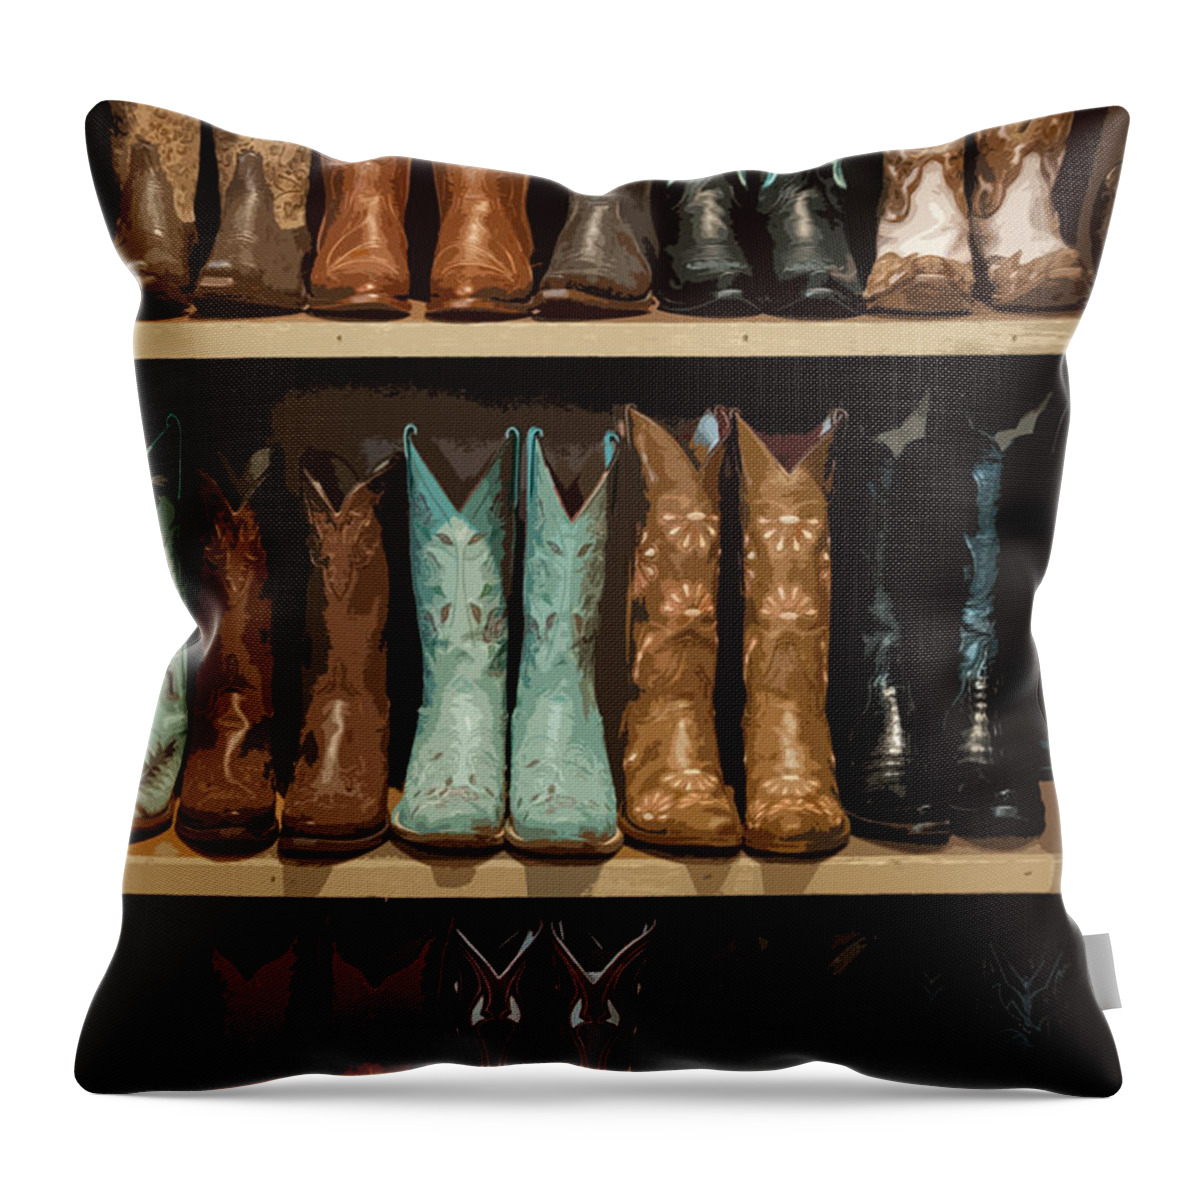 Cowboy Boots Throw Pillow featuring the digital art These Boots Are Made For Walking 3 by Jani Freimann